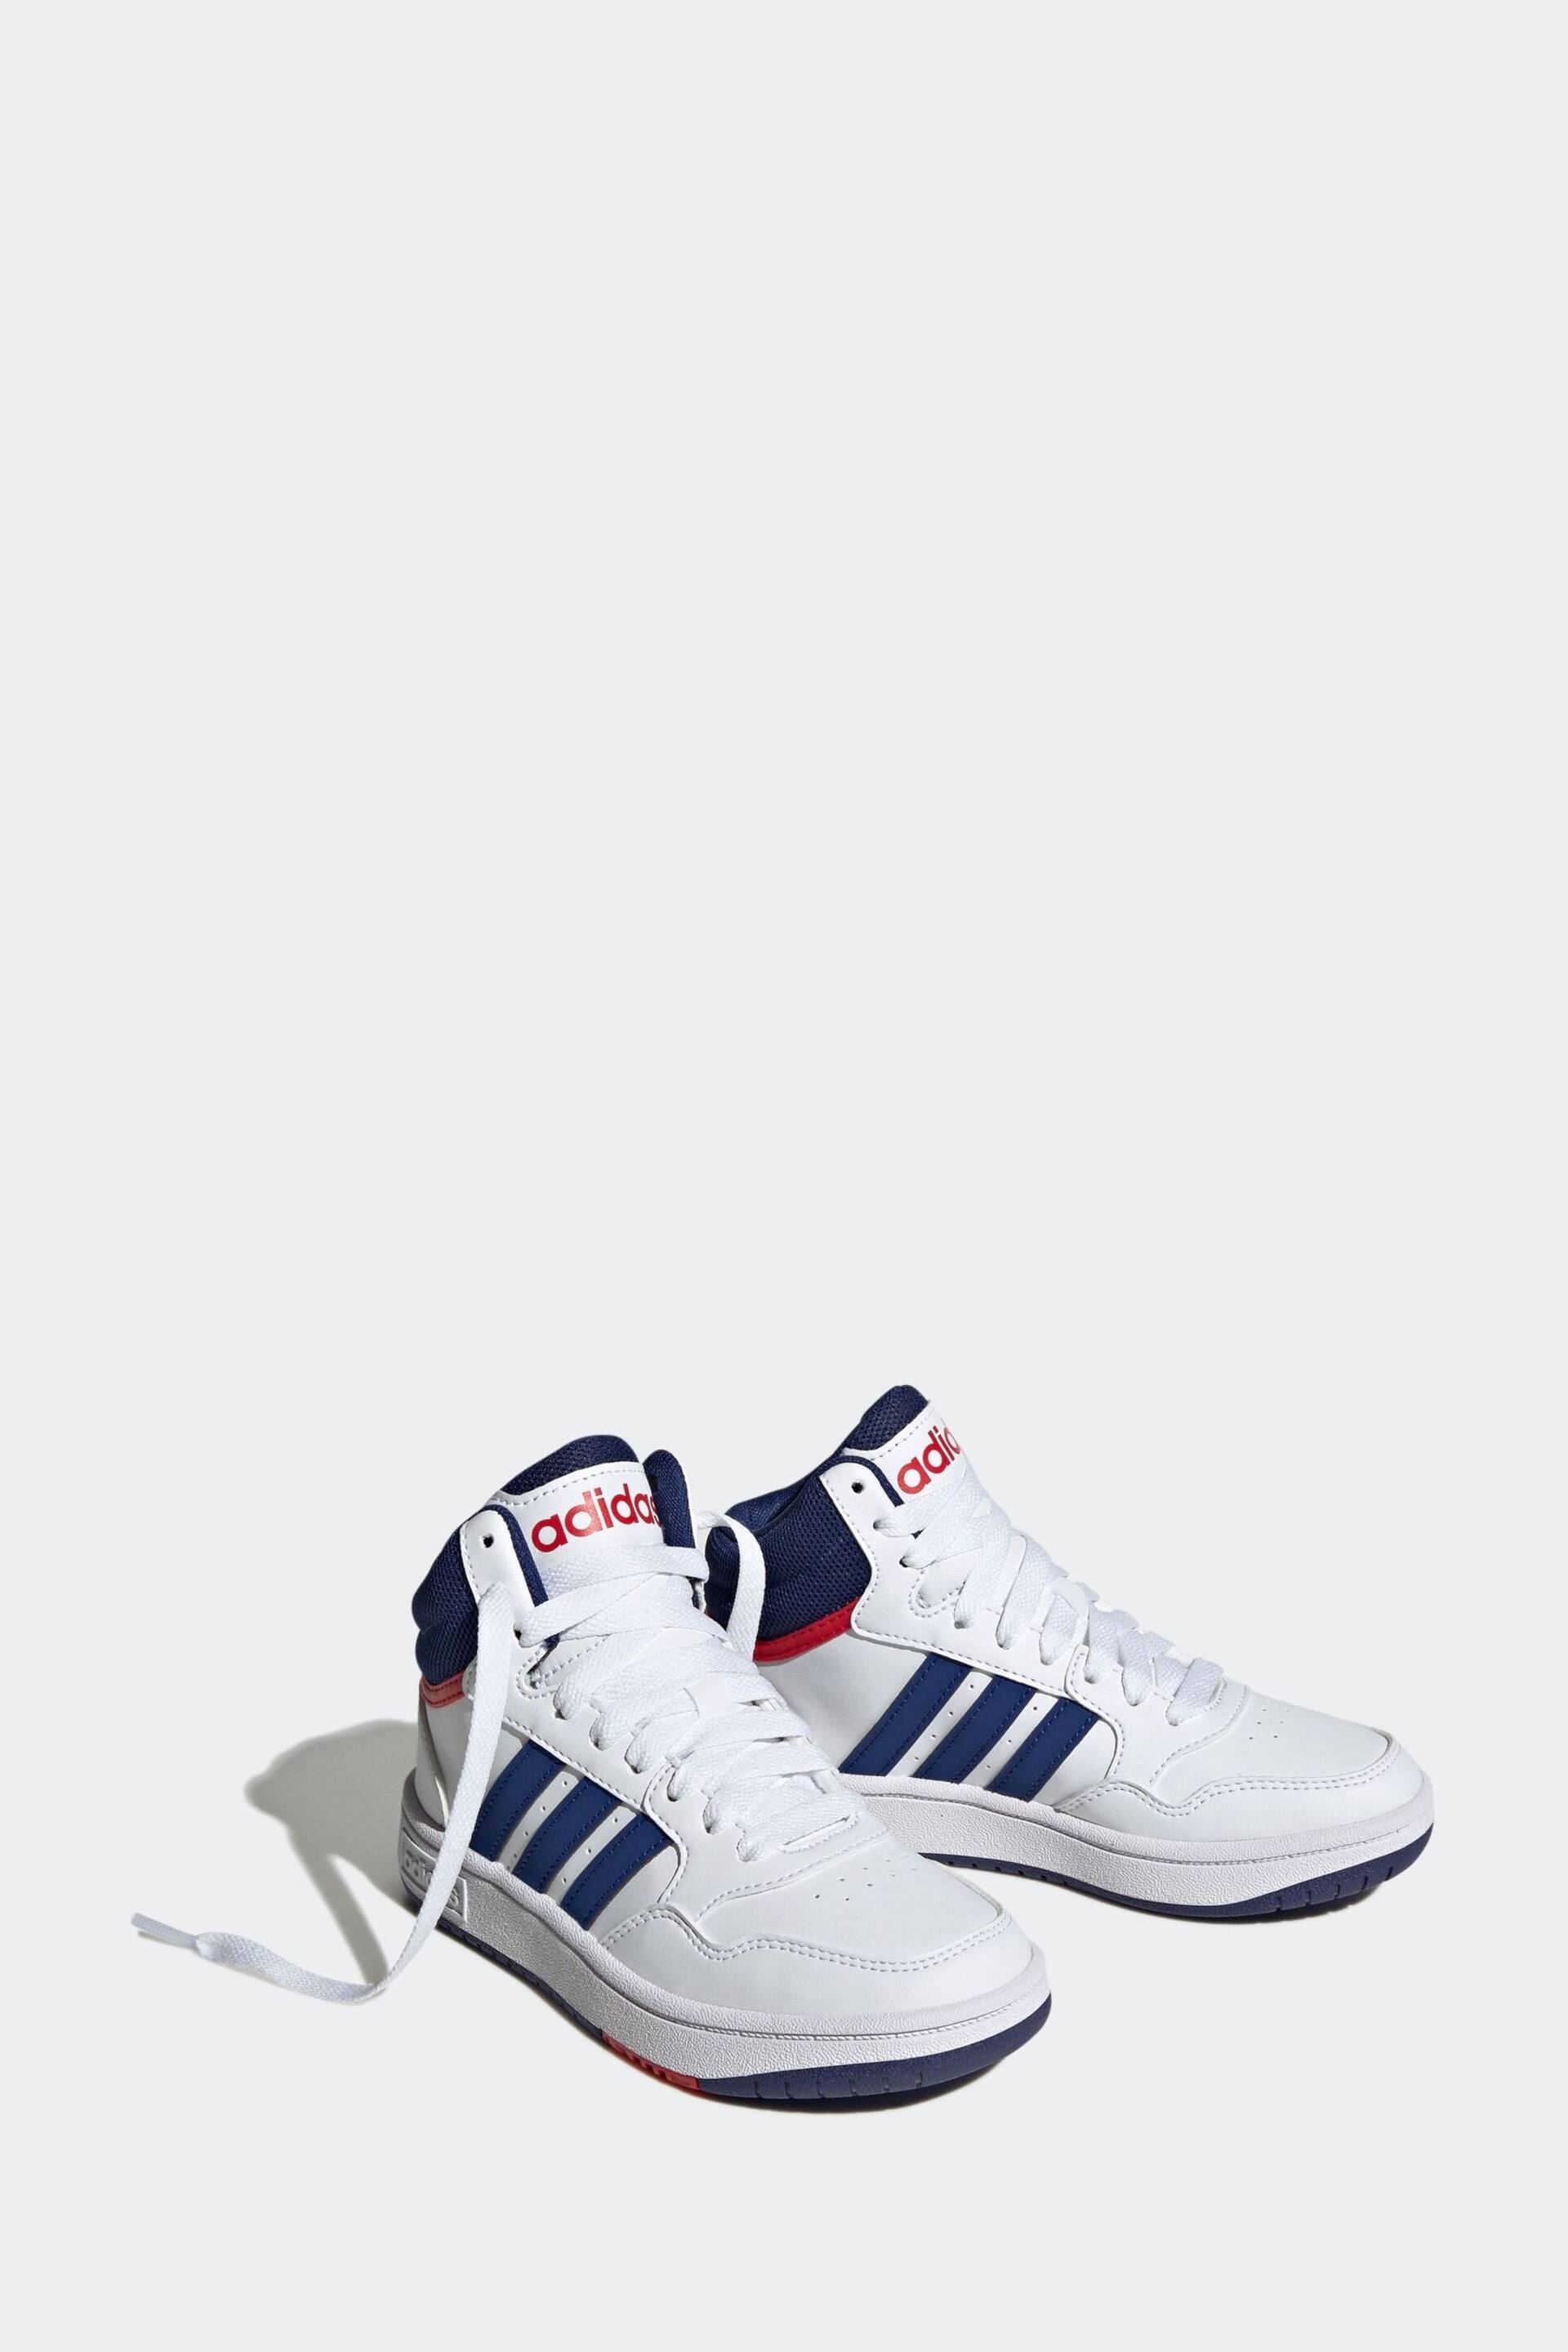 adidas White/Blue Hoops Mid Shoes - Image 3 of 9